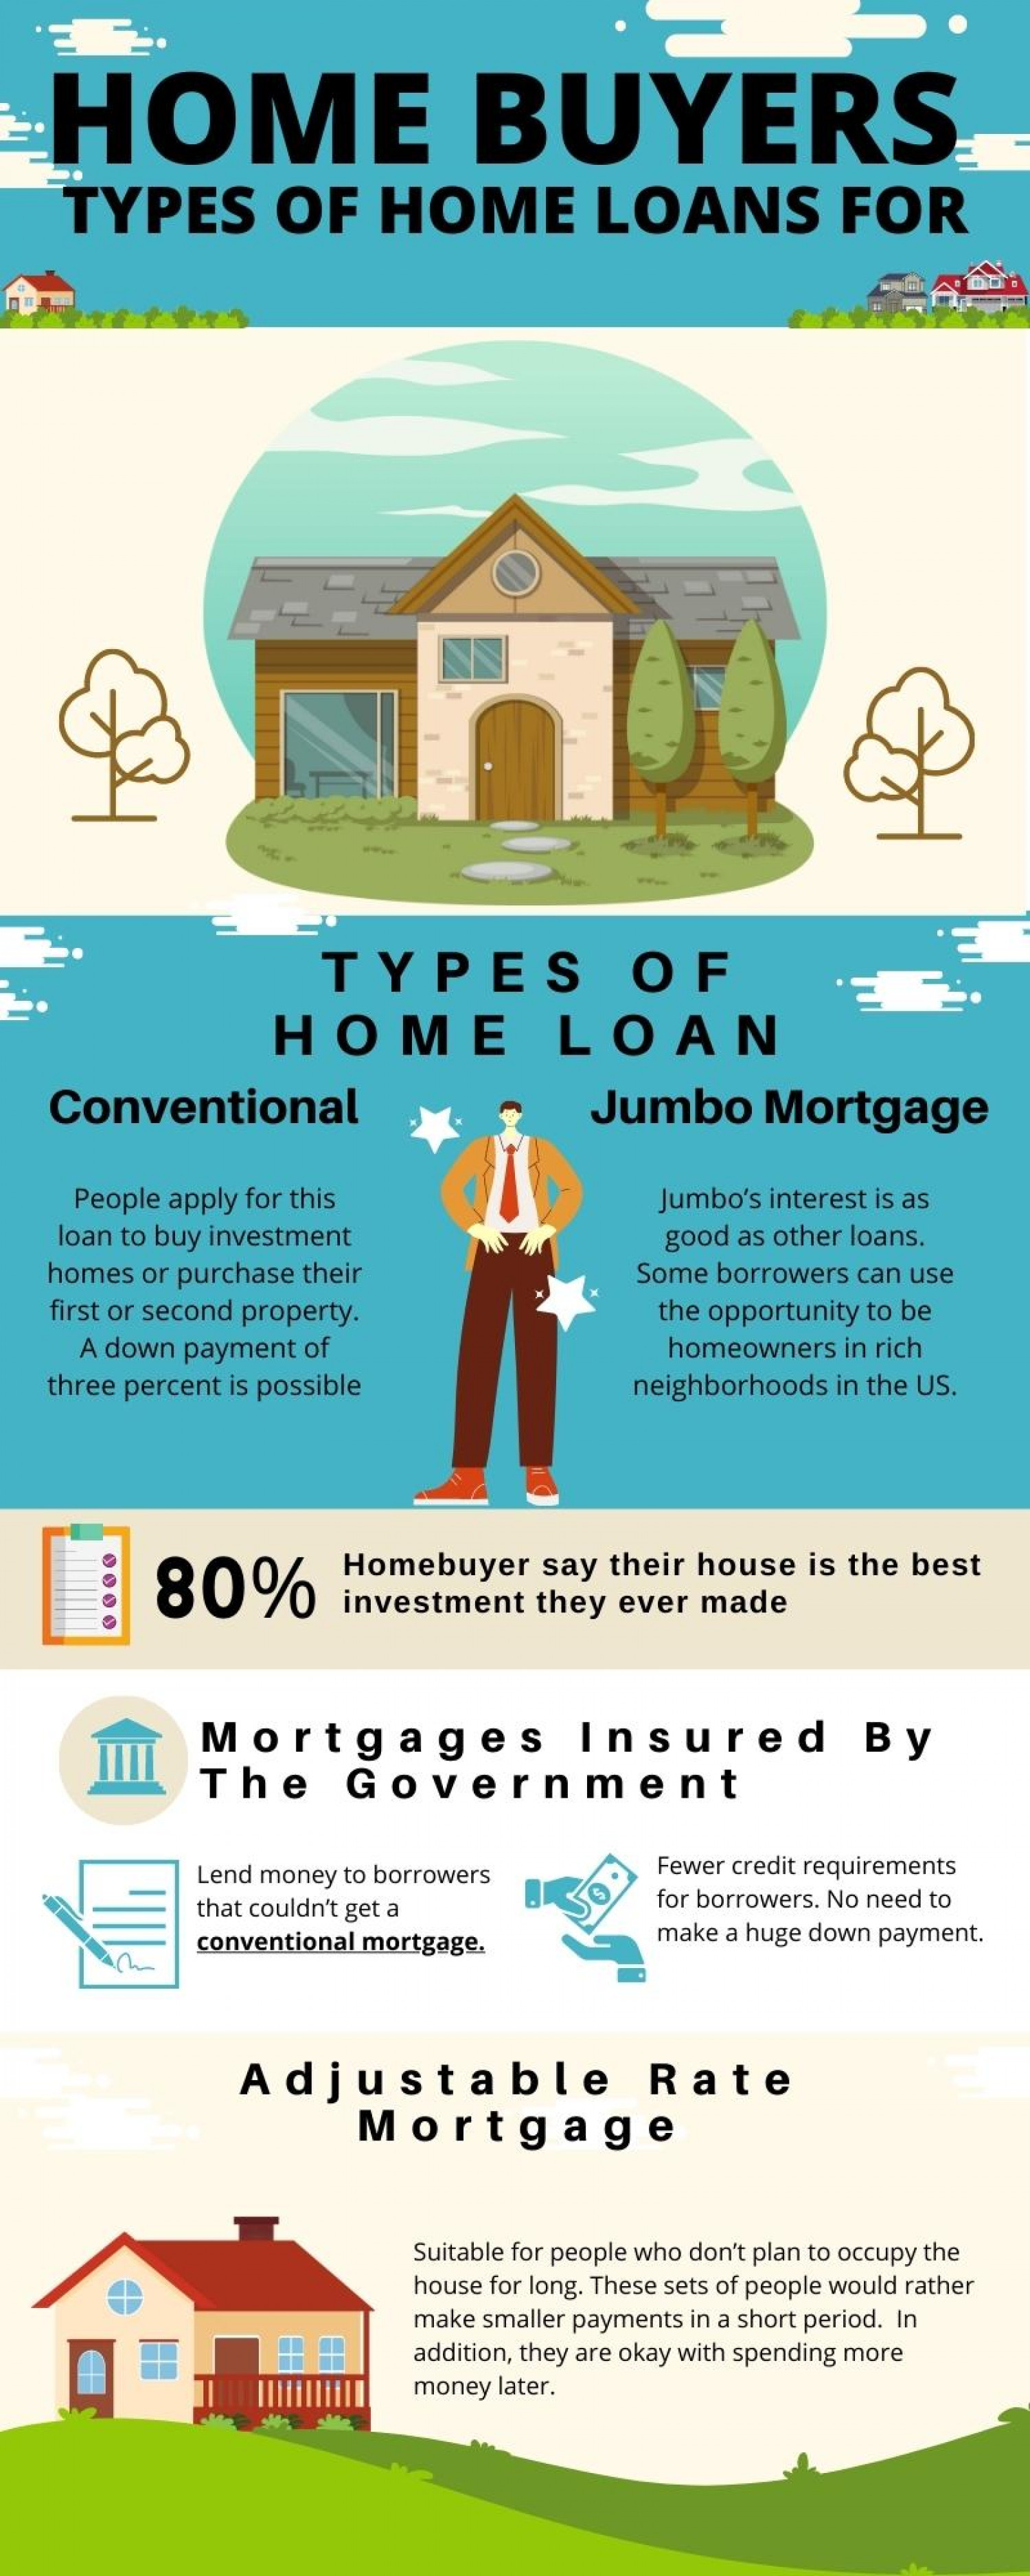 TYPES OF HOME LOANS FOR HOME BUYERS Infographic